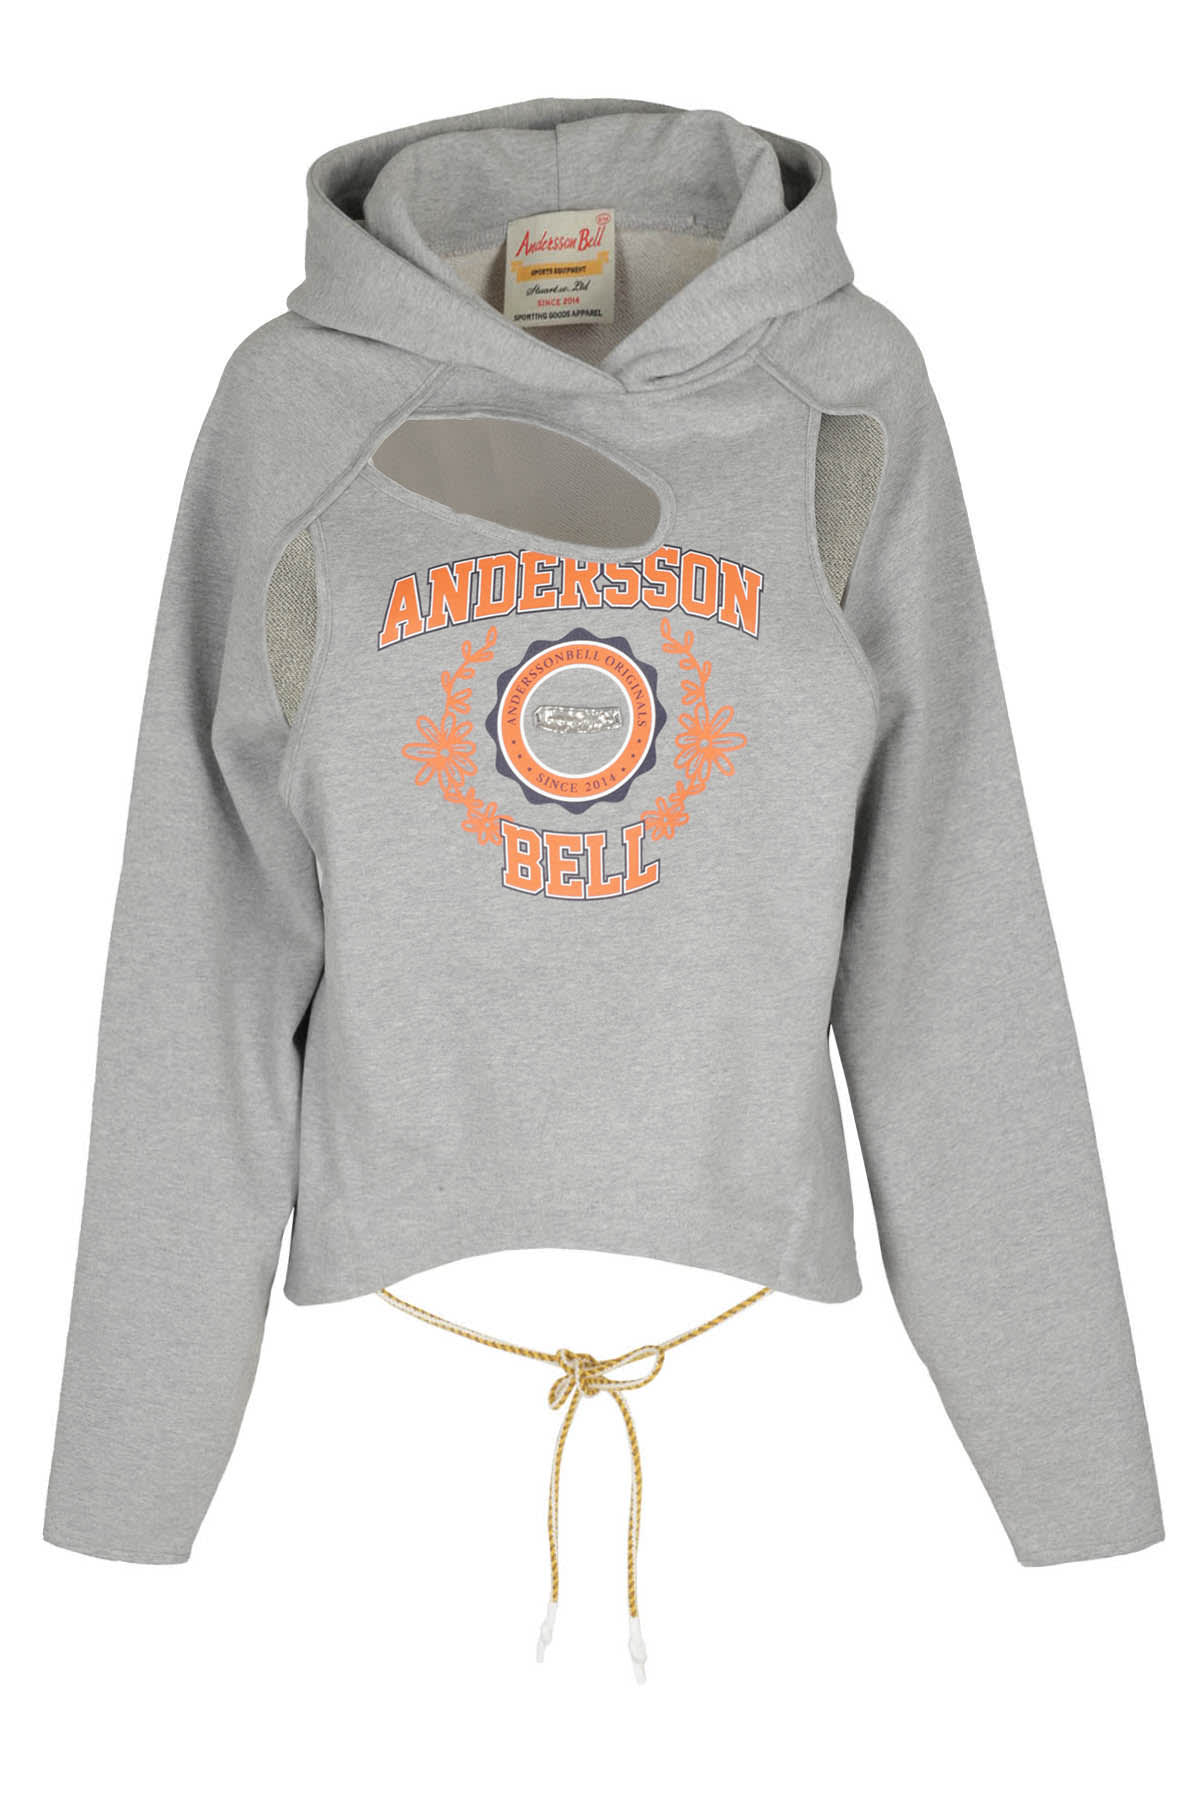 Andersson Bell Cut Out Authentic